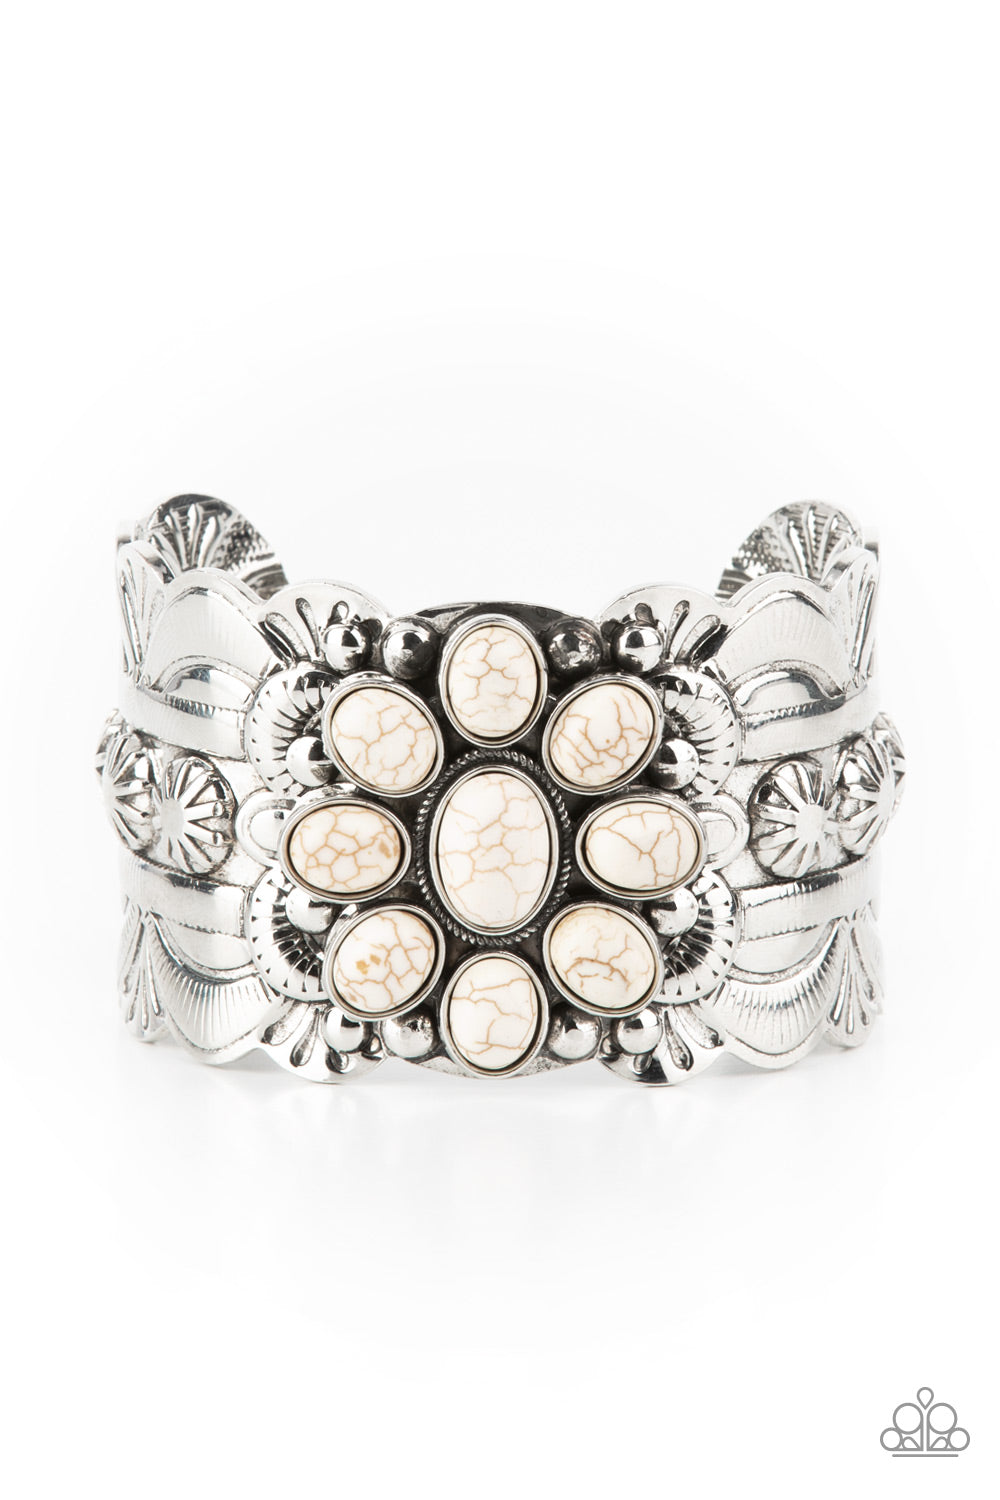 Southern Eden - White Stone Cuff Bracelets earthy white stones adorn the center of a substantial silver cuff that is studded and embossed in scalloped and sunburst accents, creating a floral centerpiece around the wrist.  Sold as one individual bracelet.